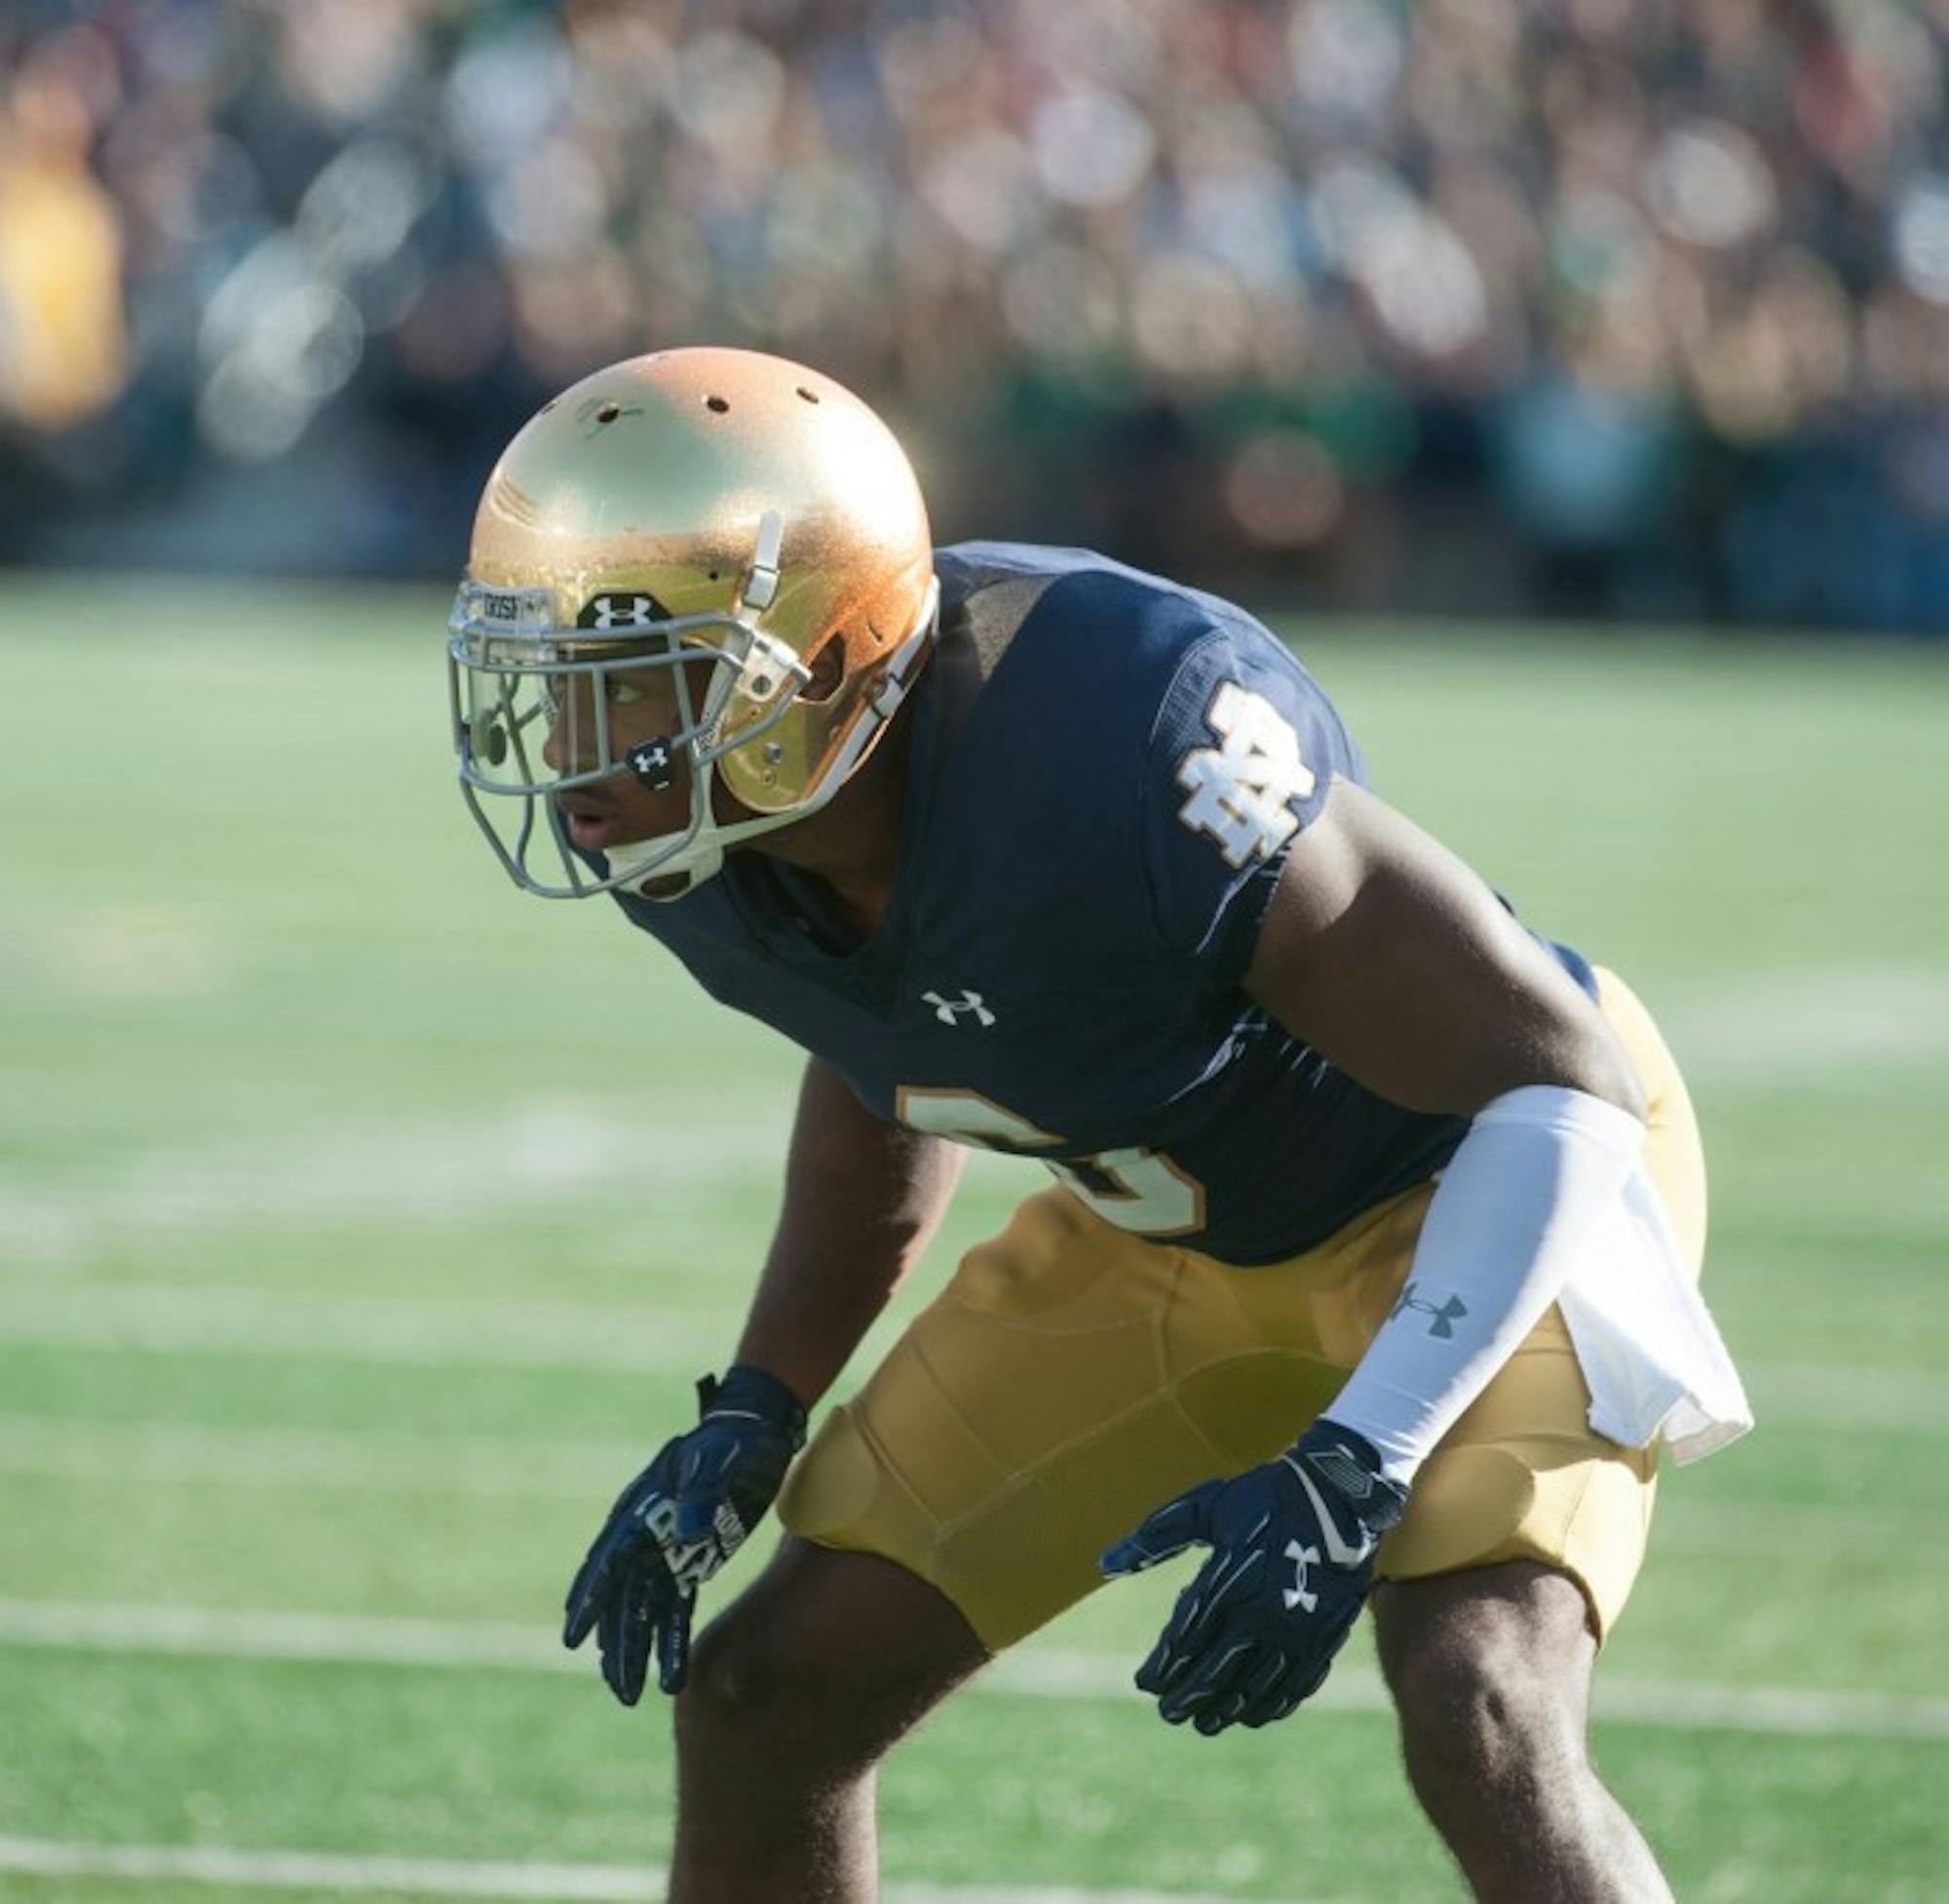 Notre Dame senior cornerback KeiVarae Russell lines up before a play as the rest those at Notre Dame Stadium is reflected off his helmet during the game Saturday.